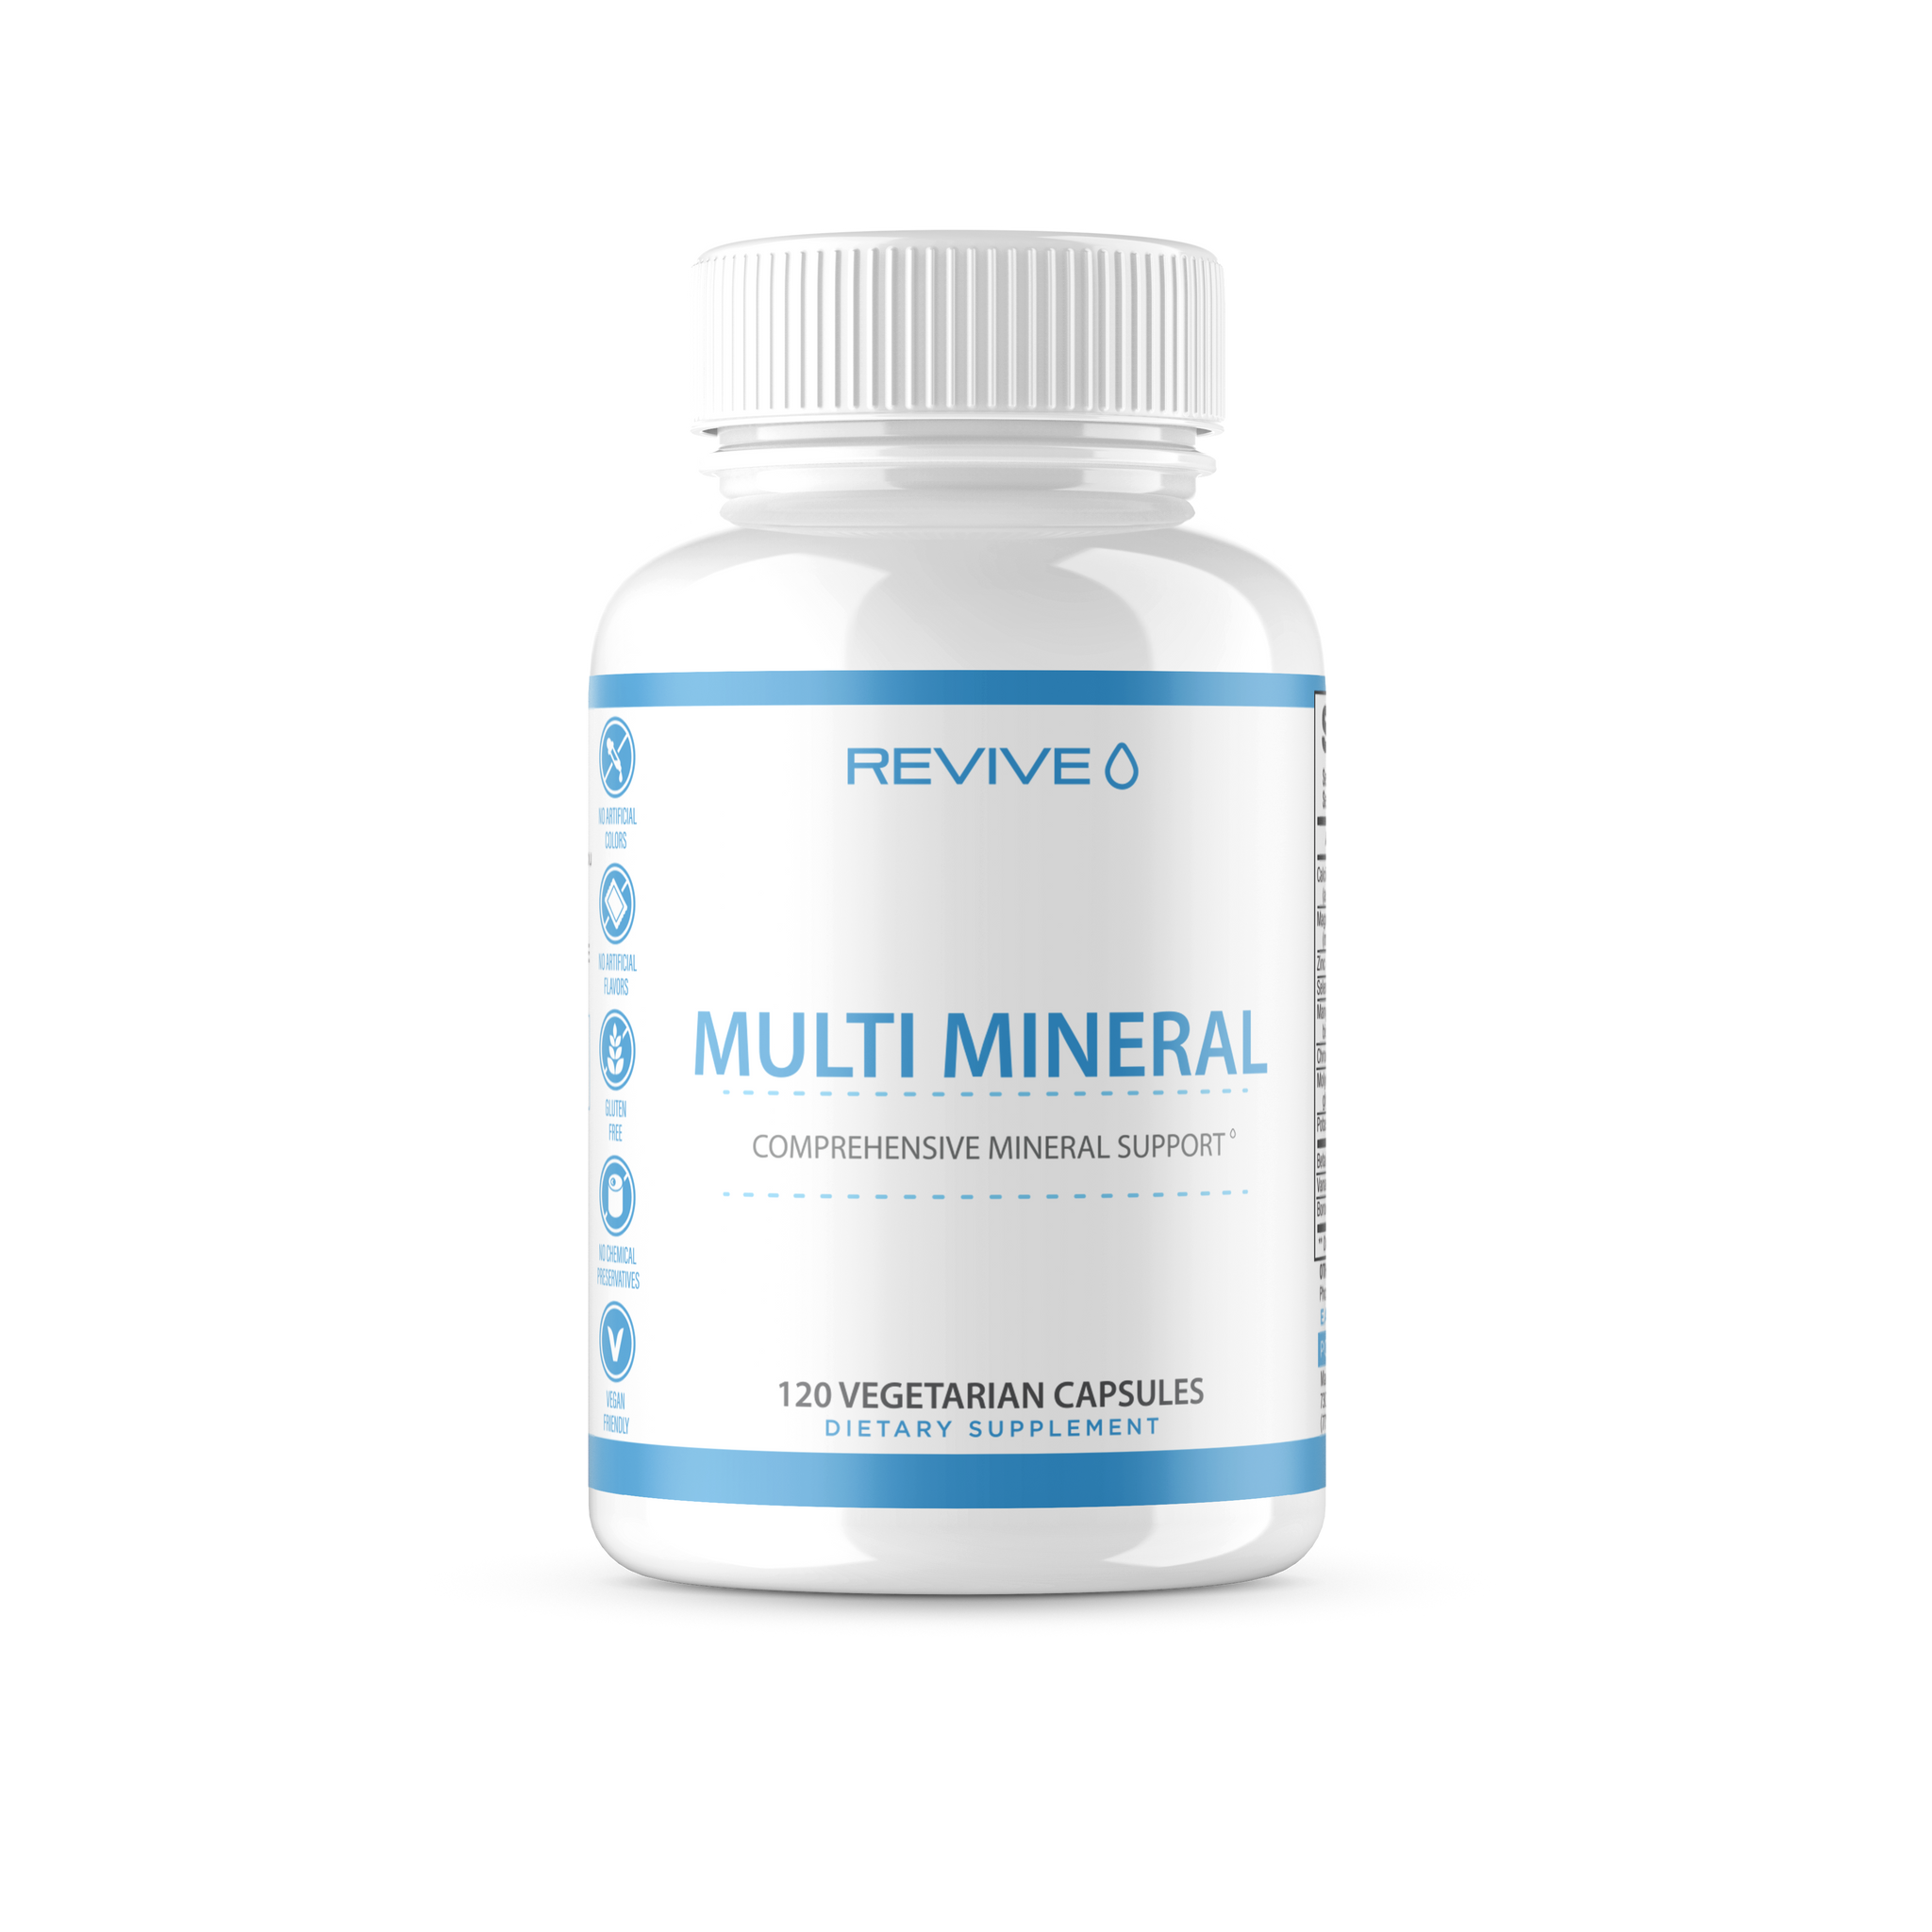 Revive MD Multi Mineral 30 Servings